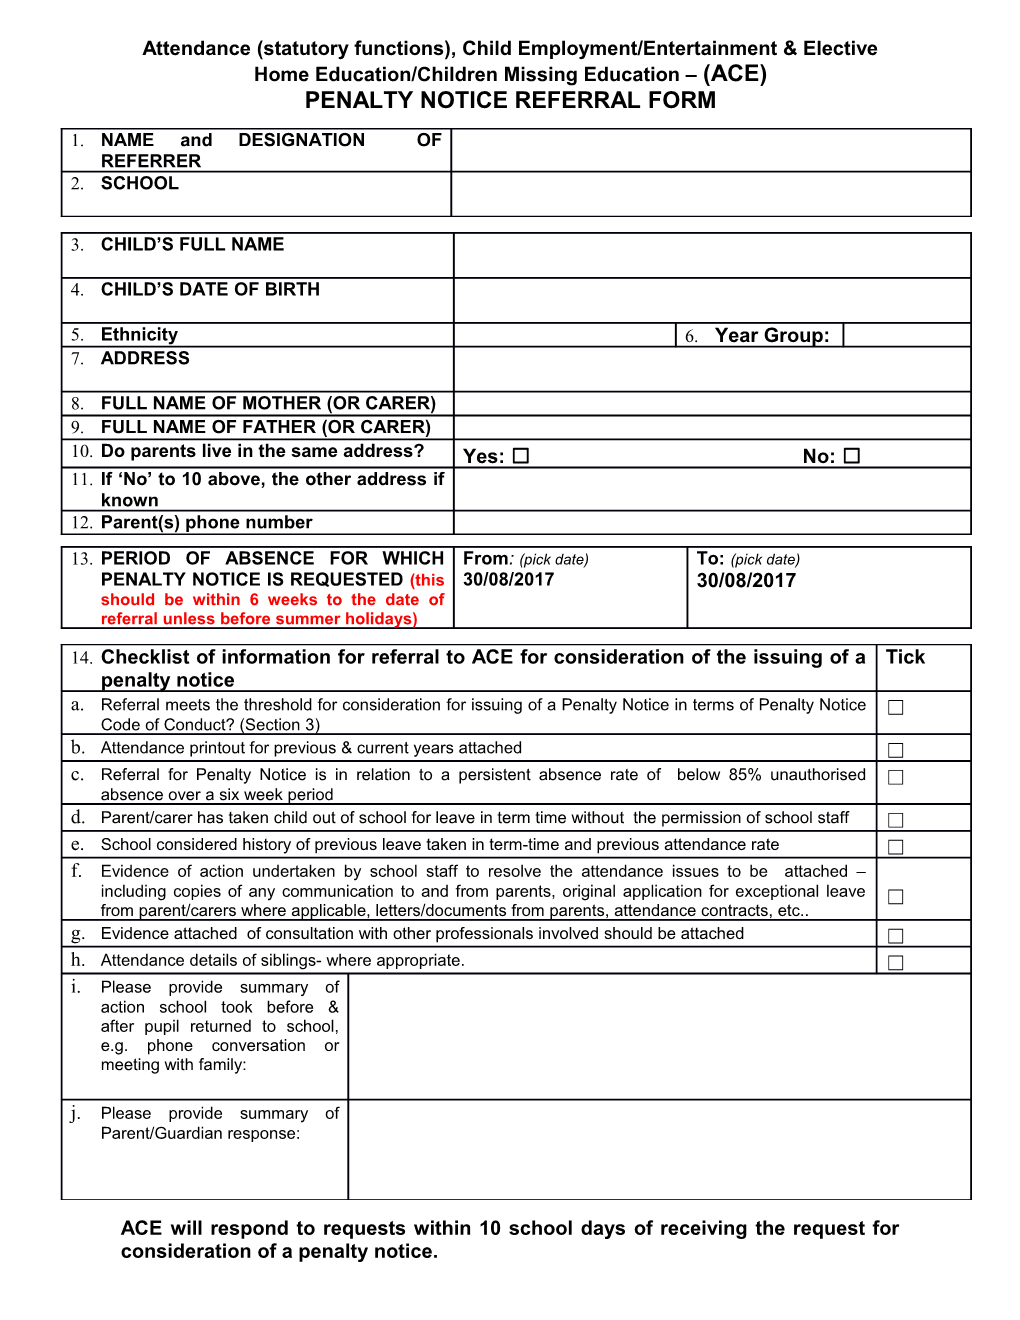 ACE 3.6 ACE Penalty Notice Referral Form